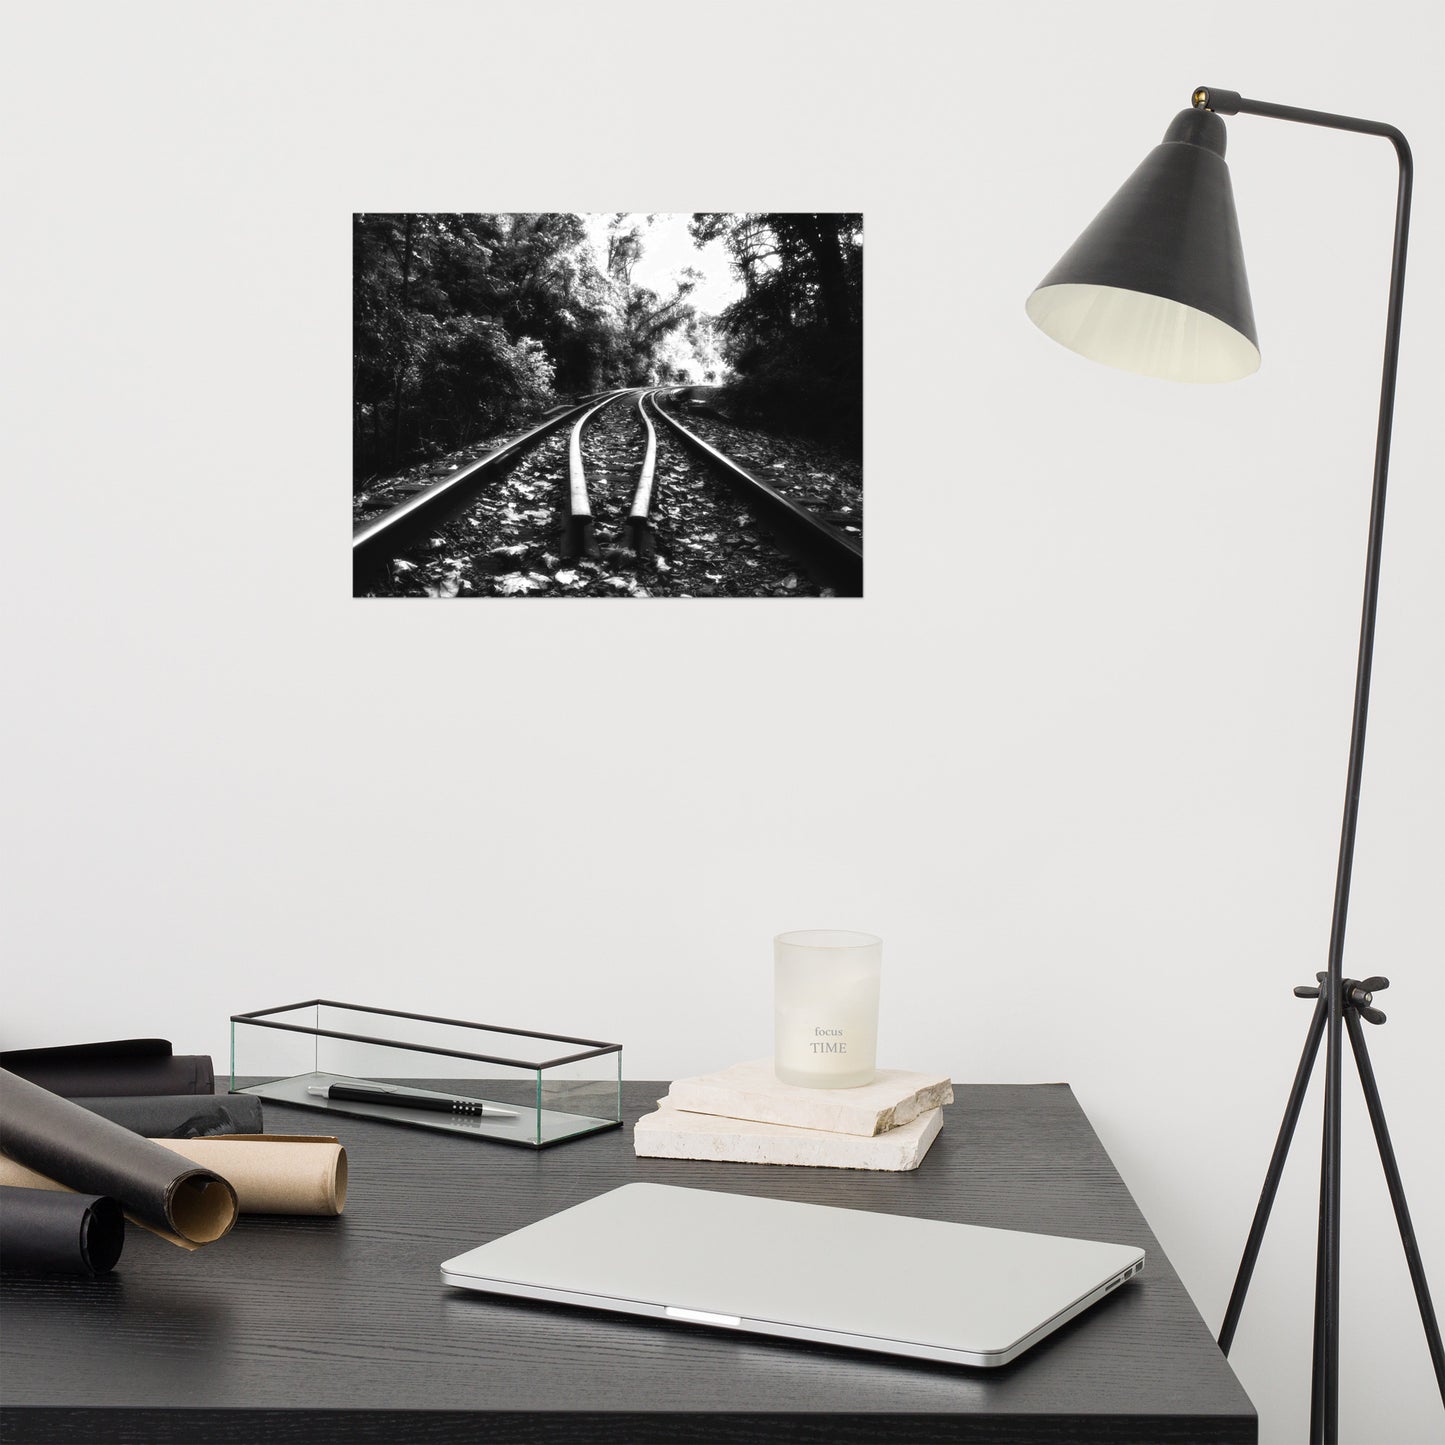 Lead Me Into The Light Black and White Landscape Photo Loose Wall Art Prints